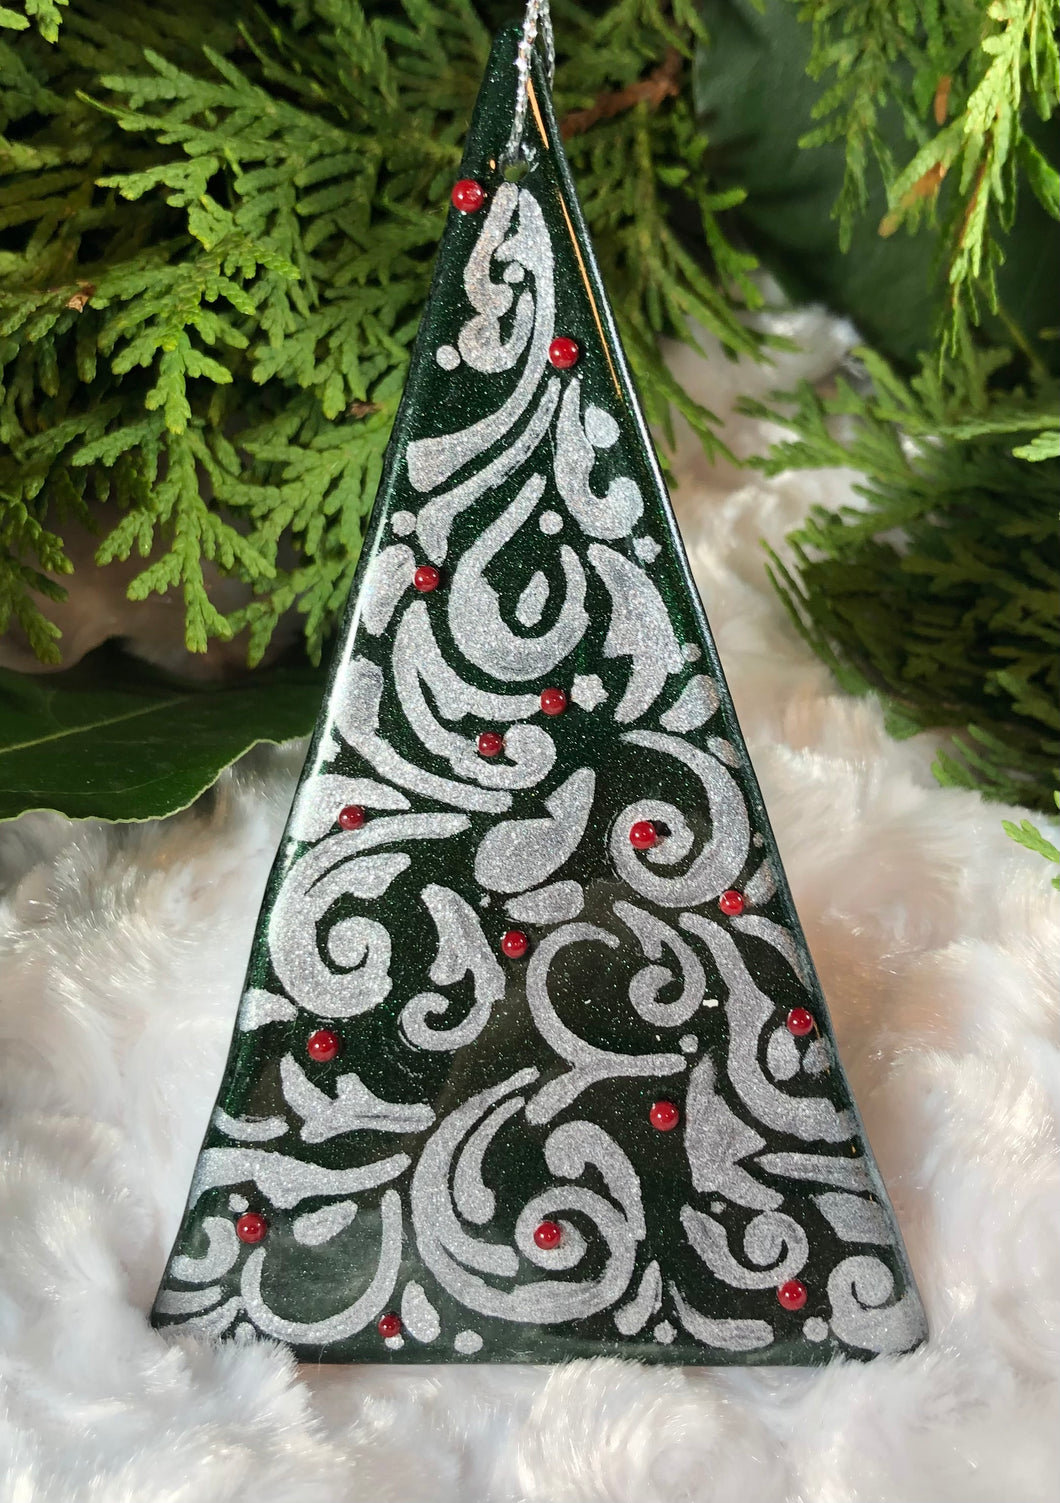 Holiday Ornaments - Adorned Scrollwork